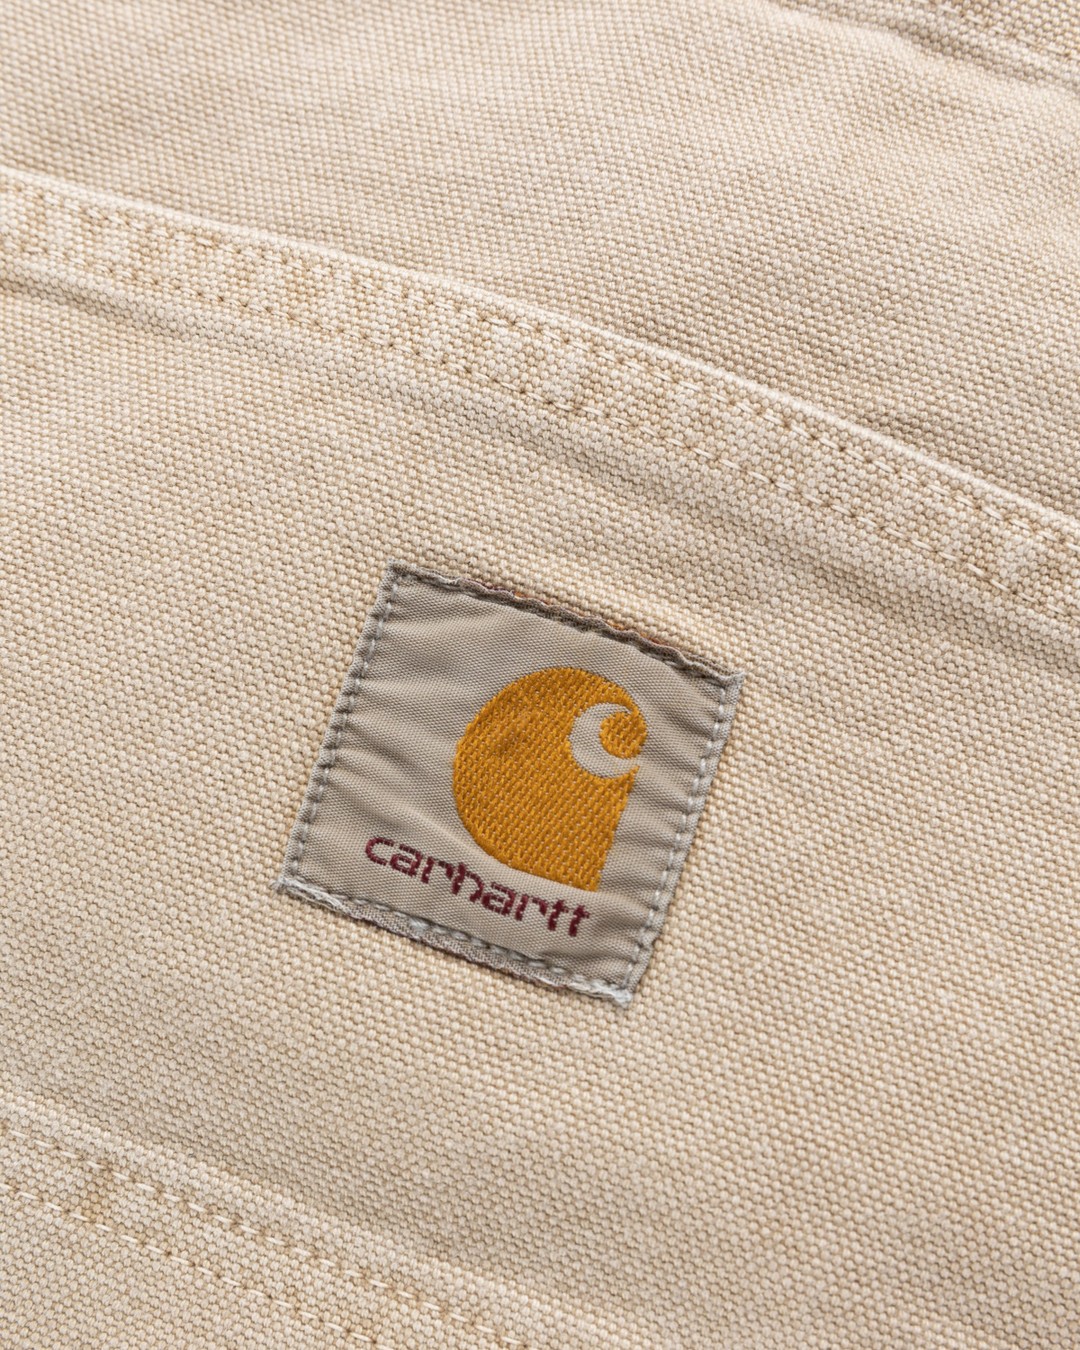 Carhartt WIP – Small Bayfield Tote Dusty Hamilton Brown Faded - Tote Bags - Brown - Image 6